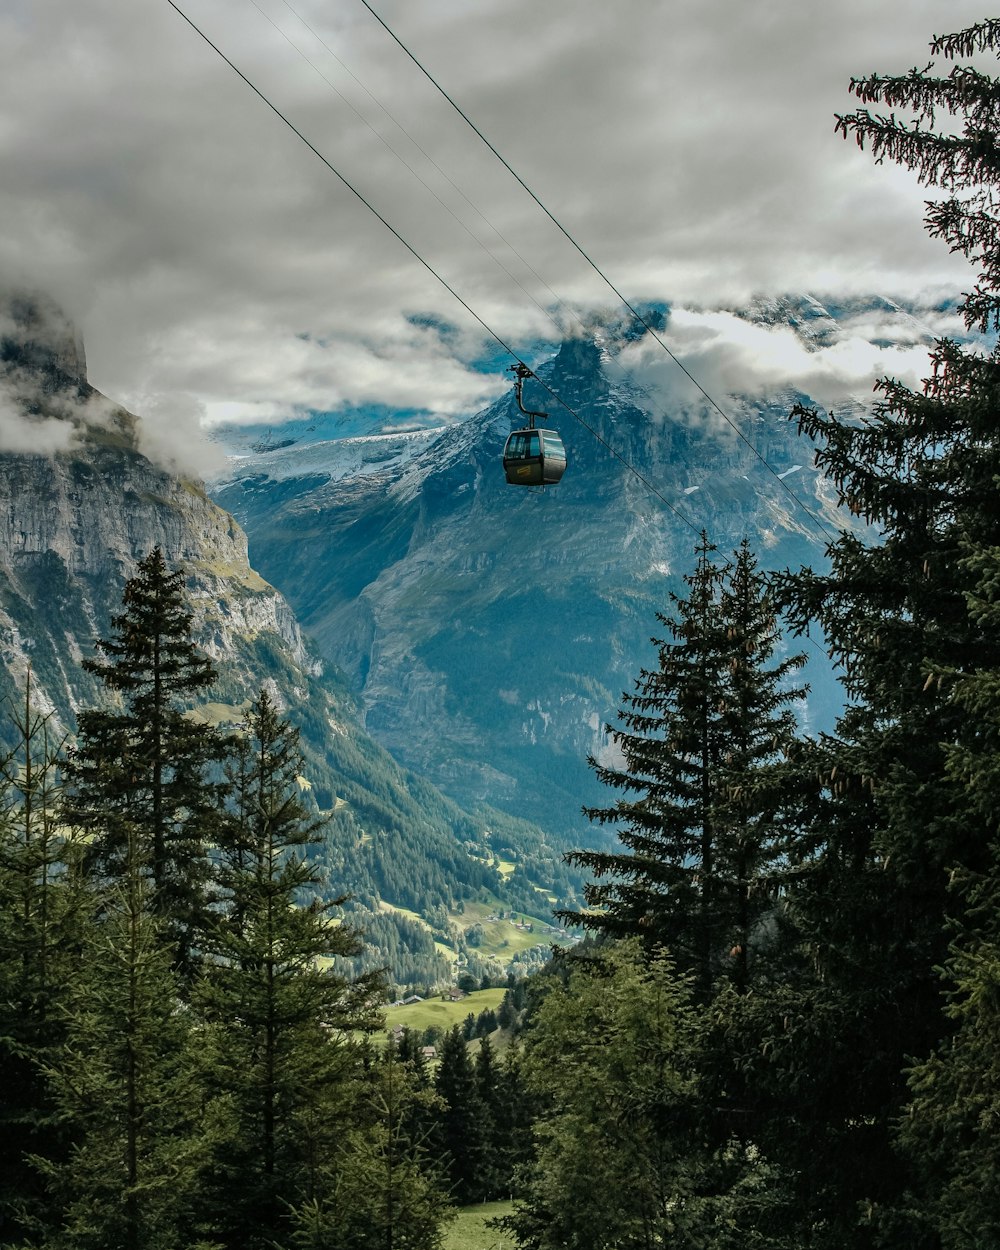 a scenic view of a mountain with a cable car